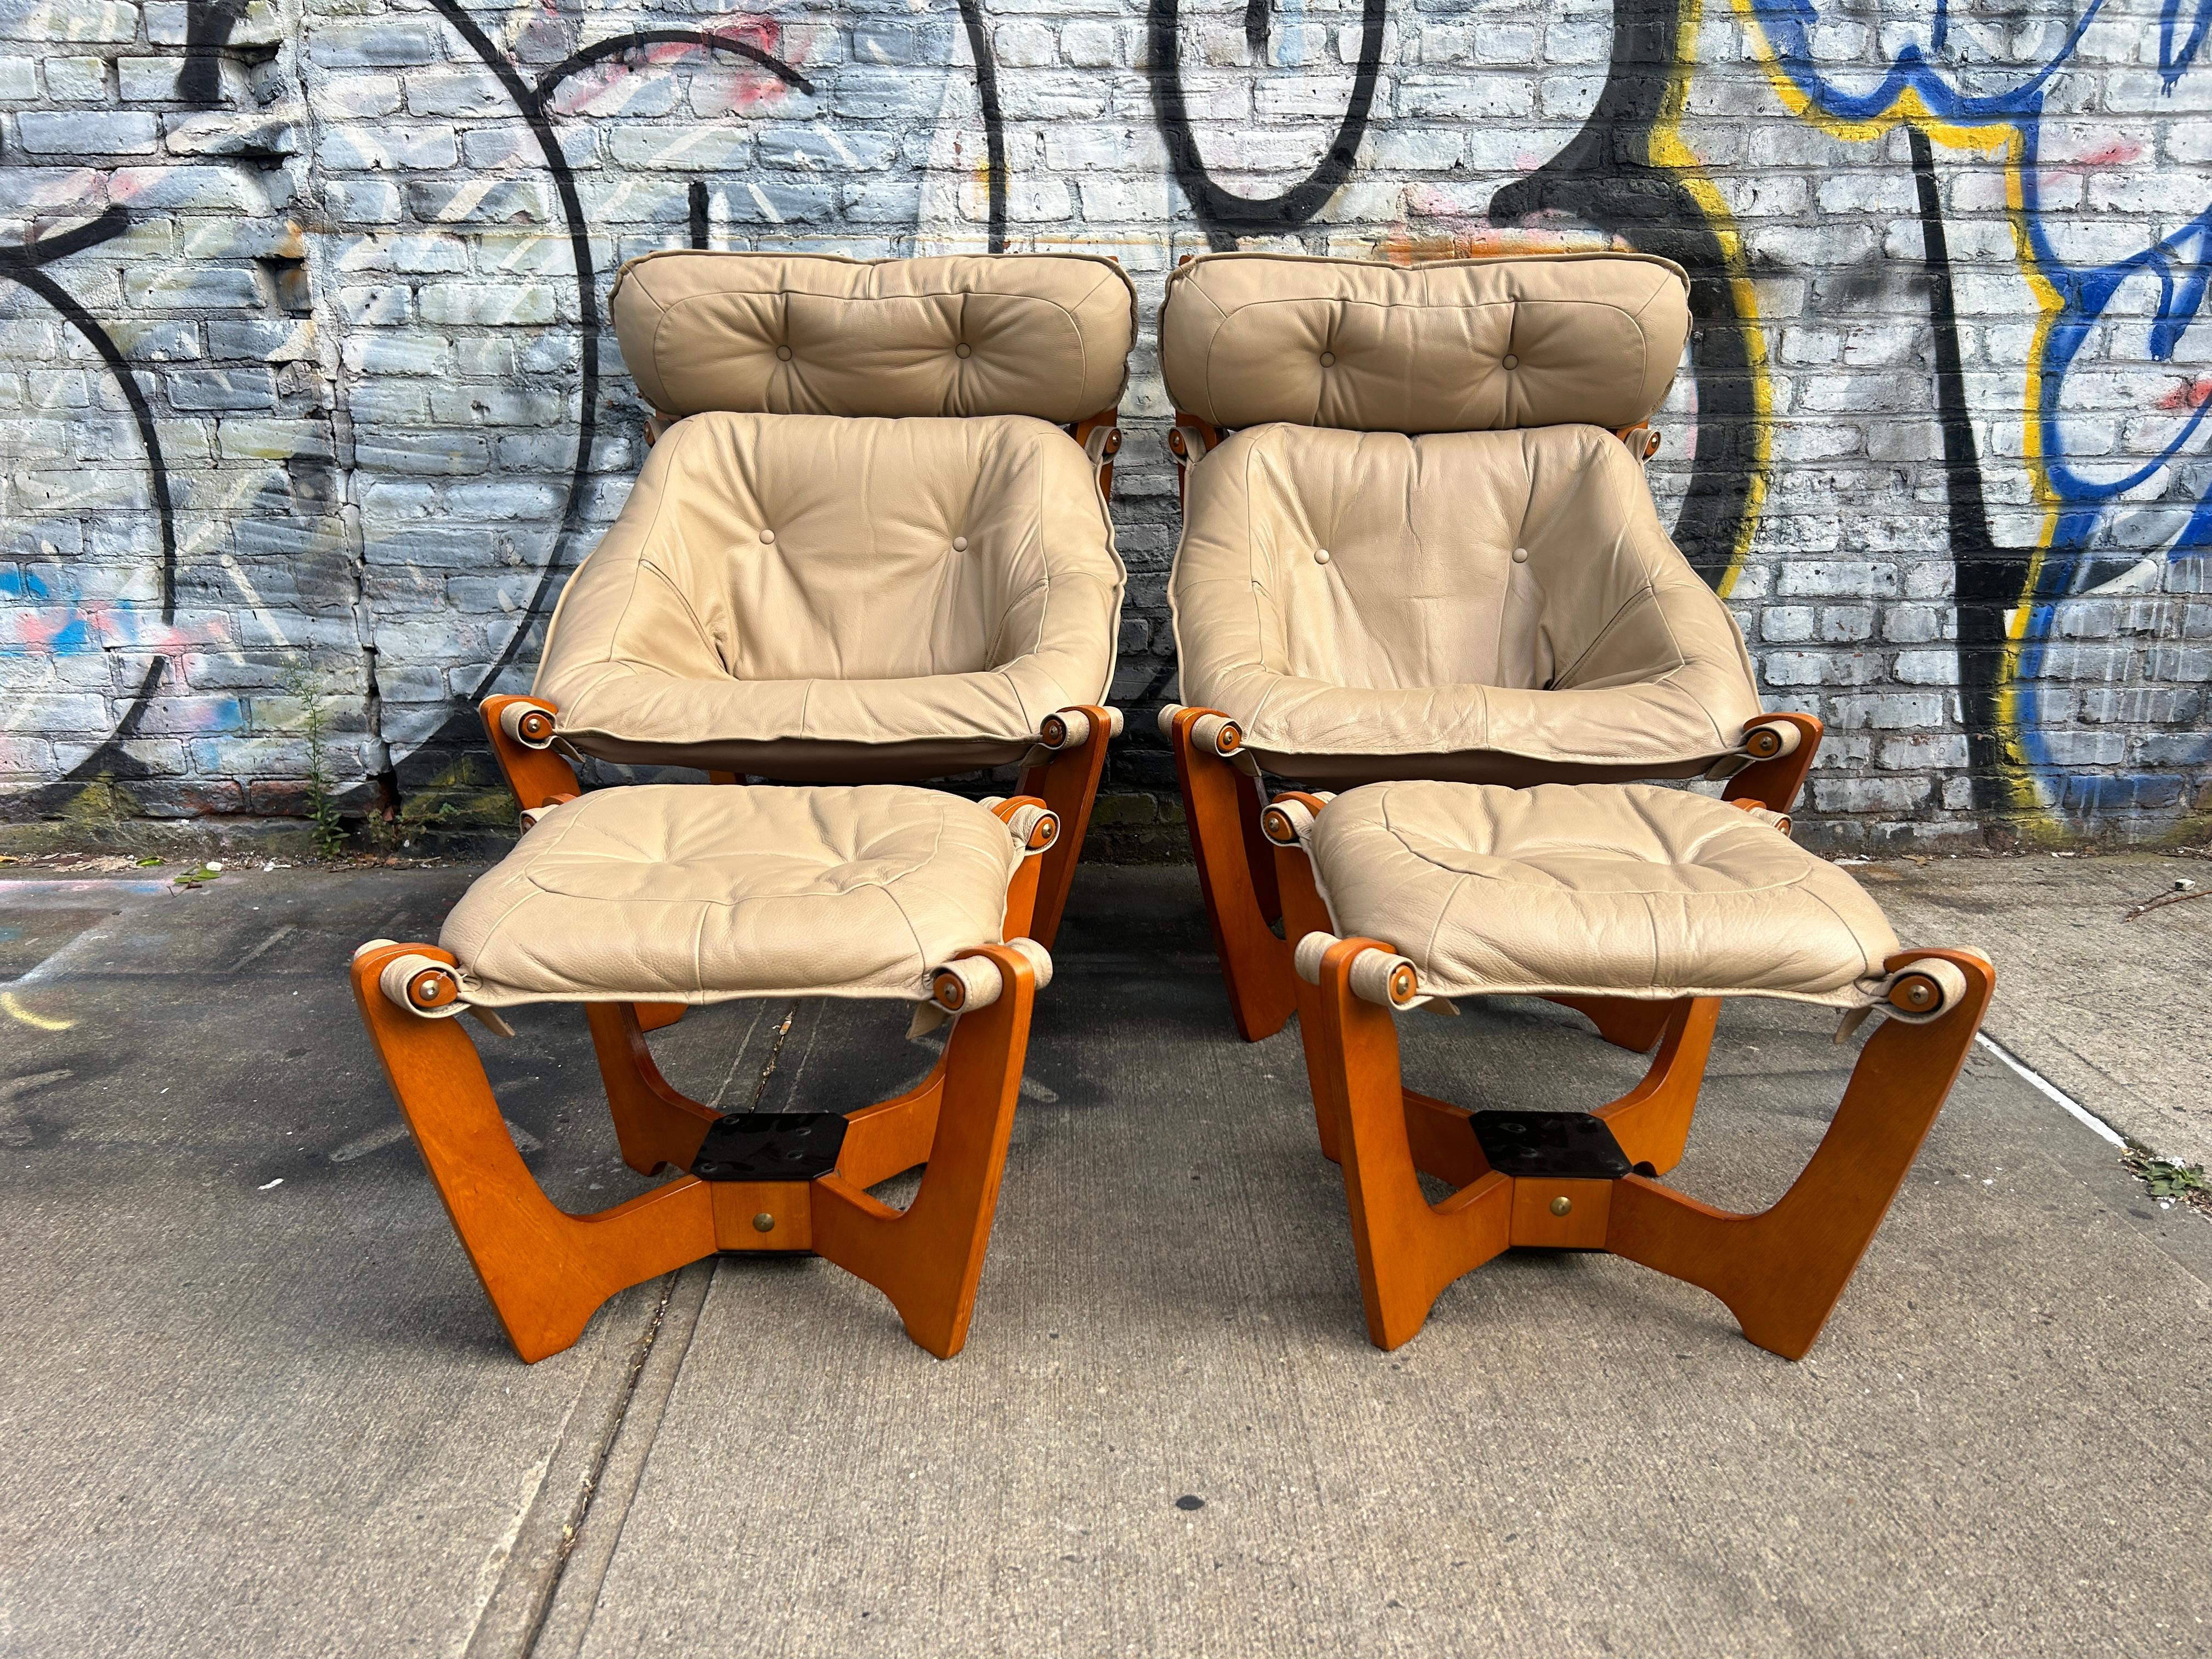 Modern tan leather Luna sling lounge chair and ottoman. Modern version of the Luna Lounge chair in the style of Odd Knutsen. Light tan soft leather lounge chair with matching ottoman. Flat wood frame with Brass hardware. Ready for use. Located in